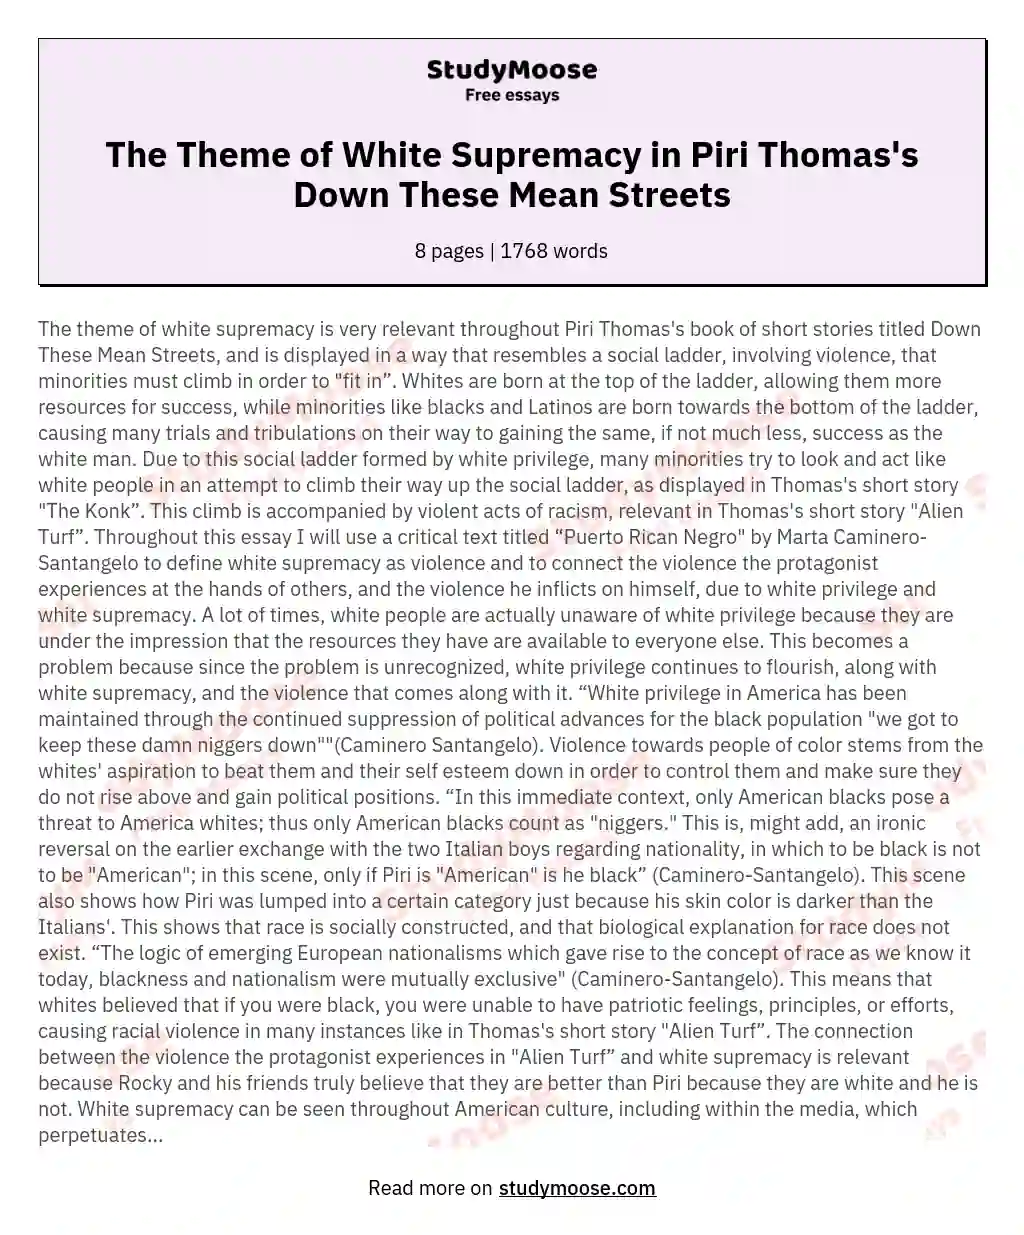 The Theme of White Supremacy in Piri Thomas's Down These Mean Streets essay